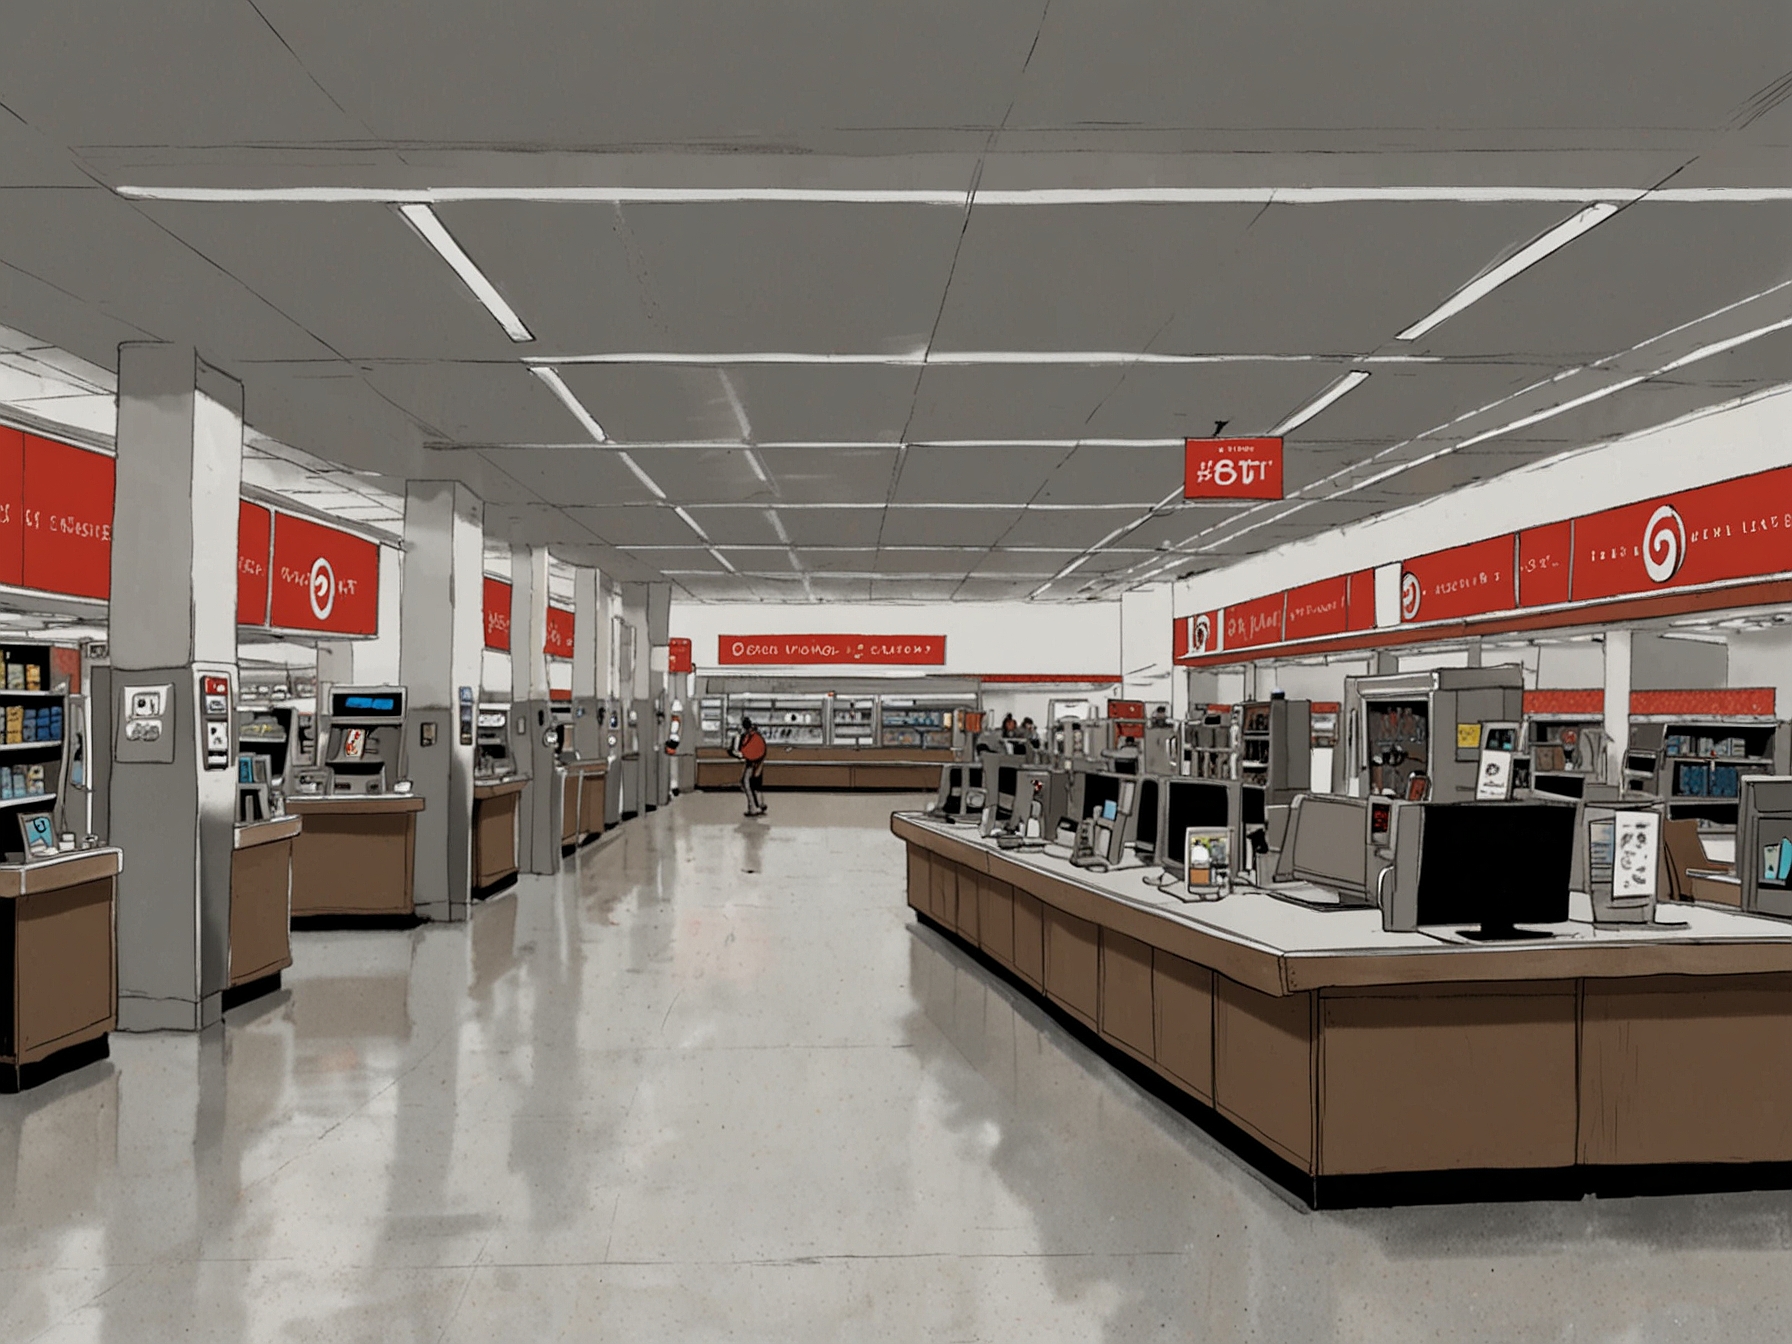 A comparison image highlighting the shorter regular checkout lanes versus the unexpectedly long express checkout lanes at a Target store.